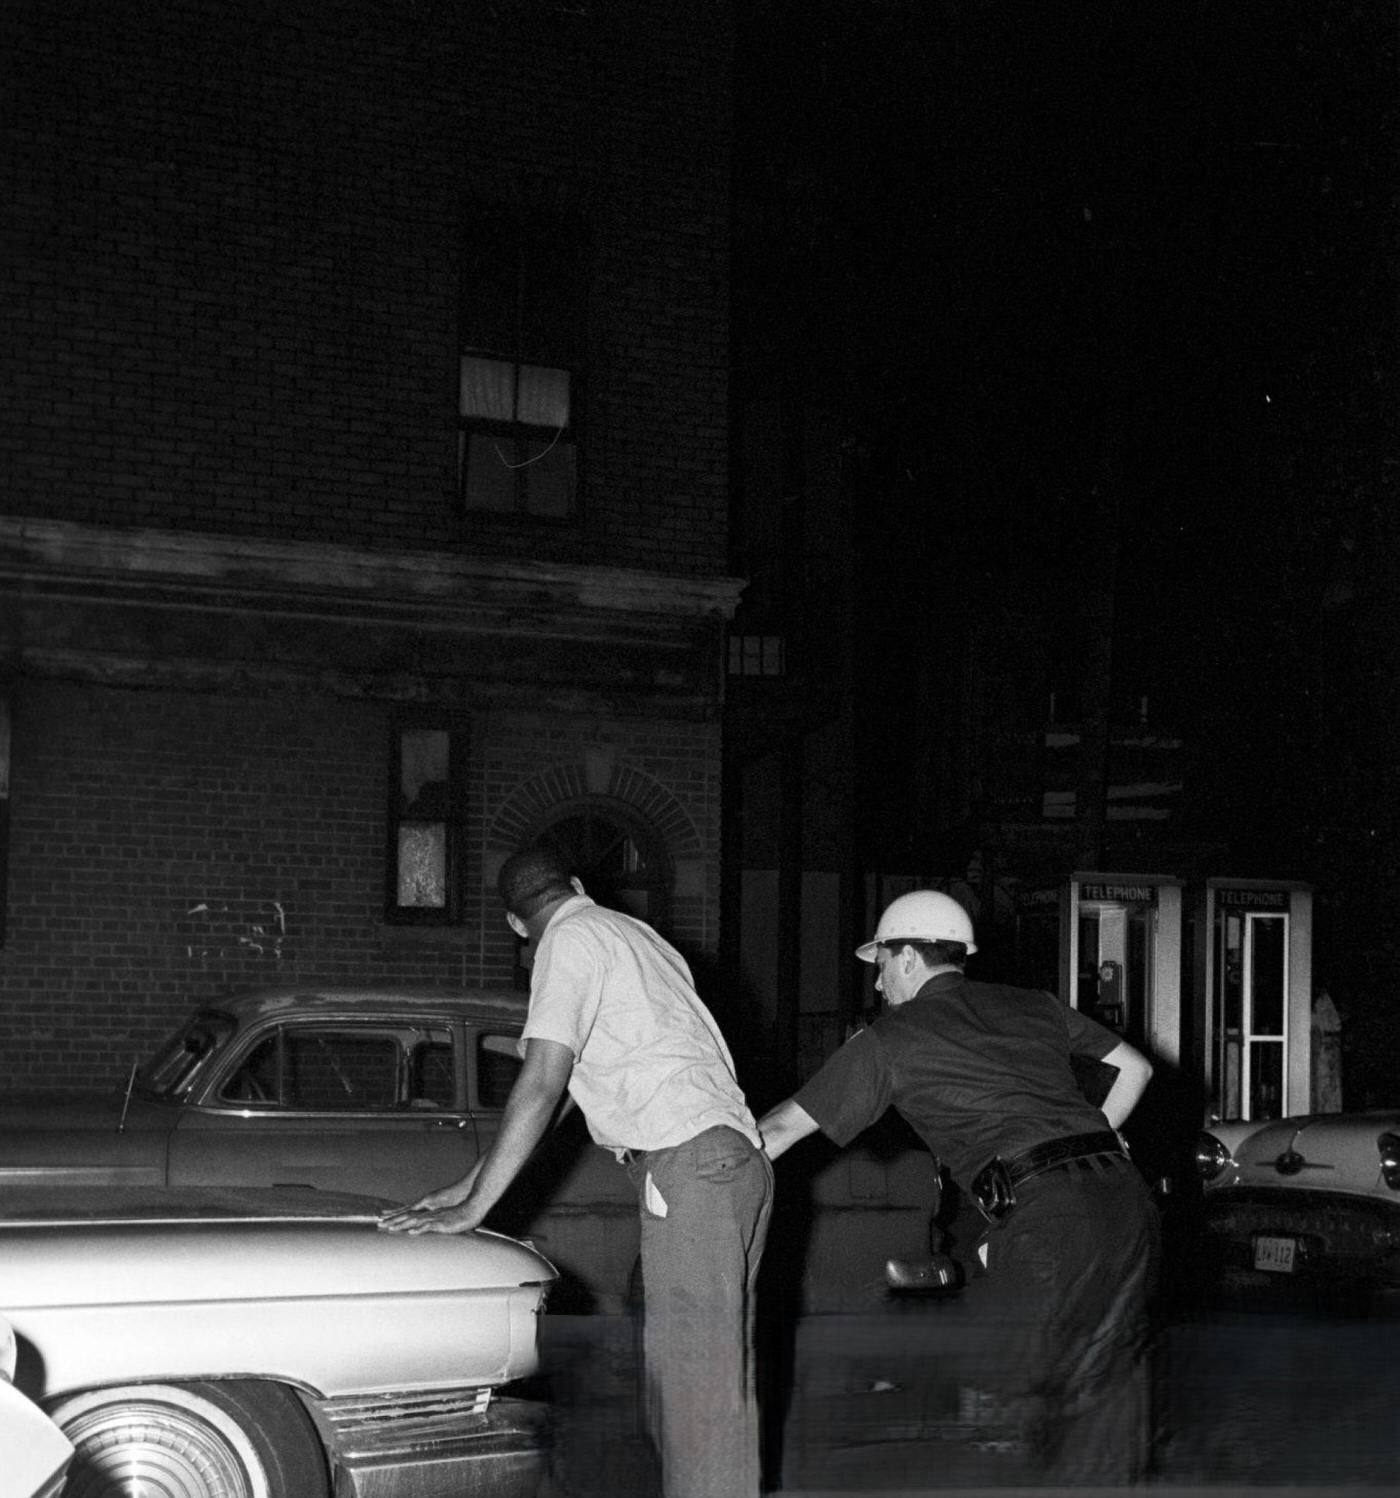 A National Police officer searches an African American man in front of a parked car